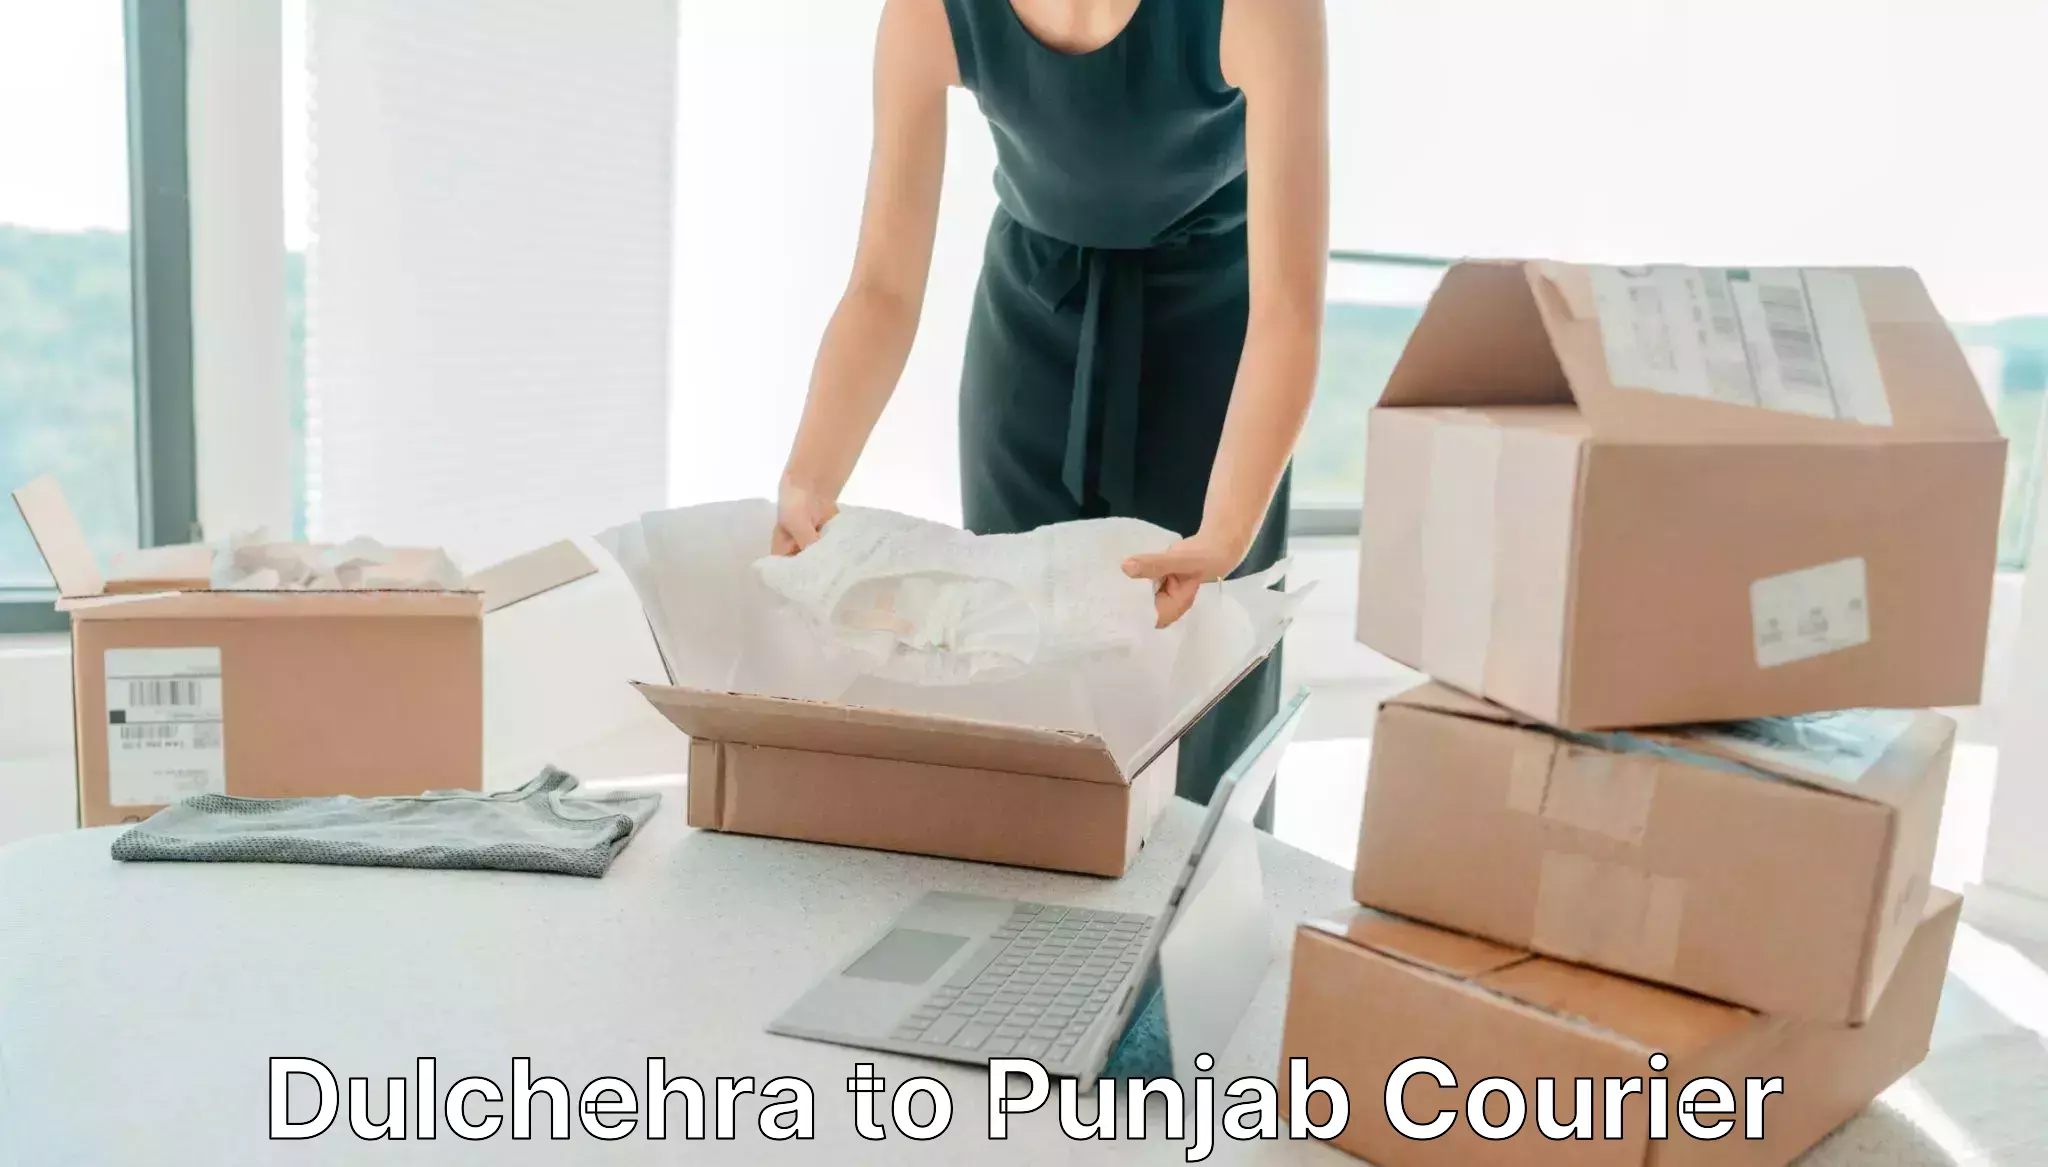 High-quality delivery services Dulchehra to Amritsar